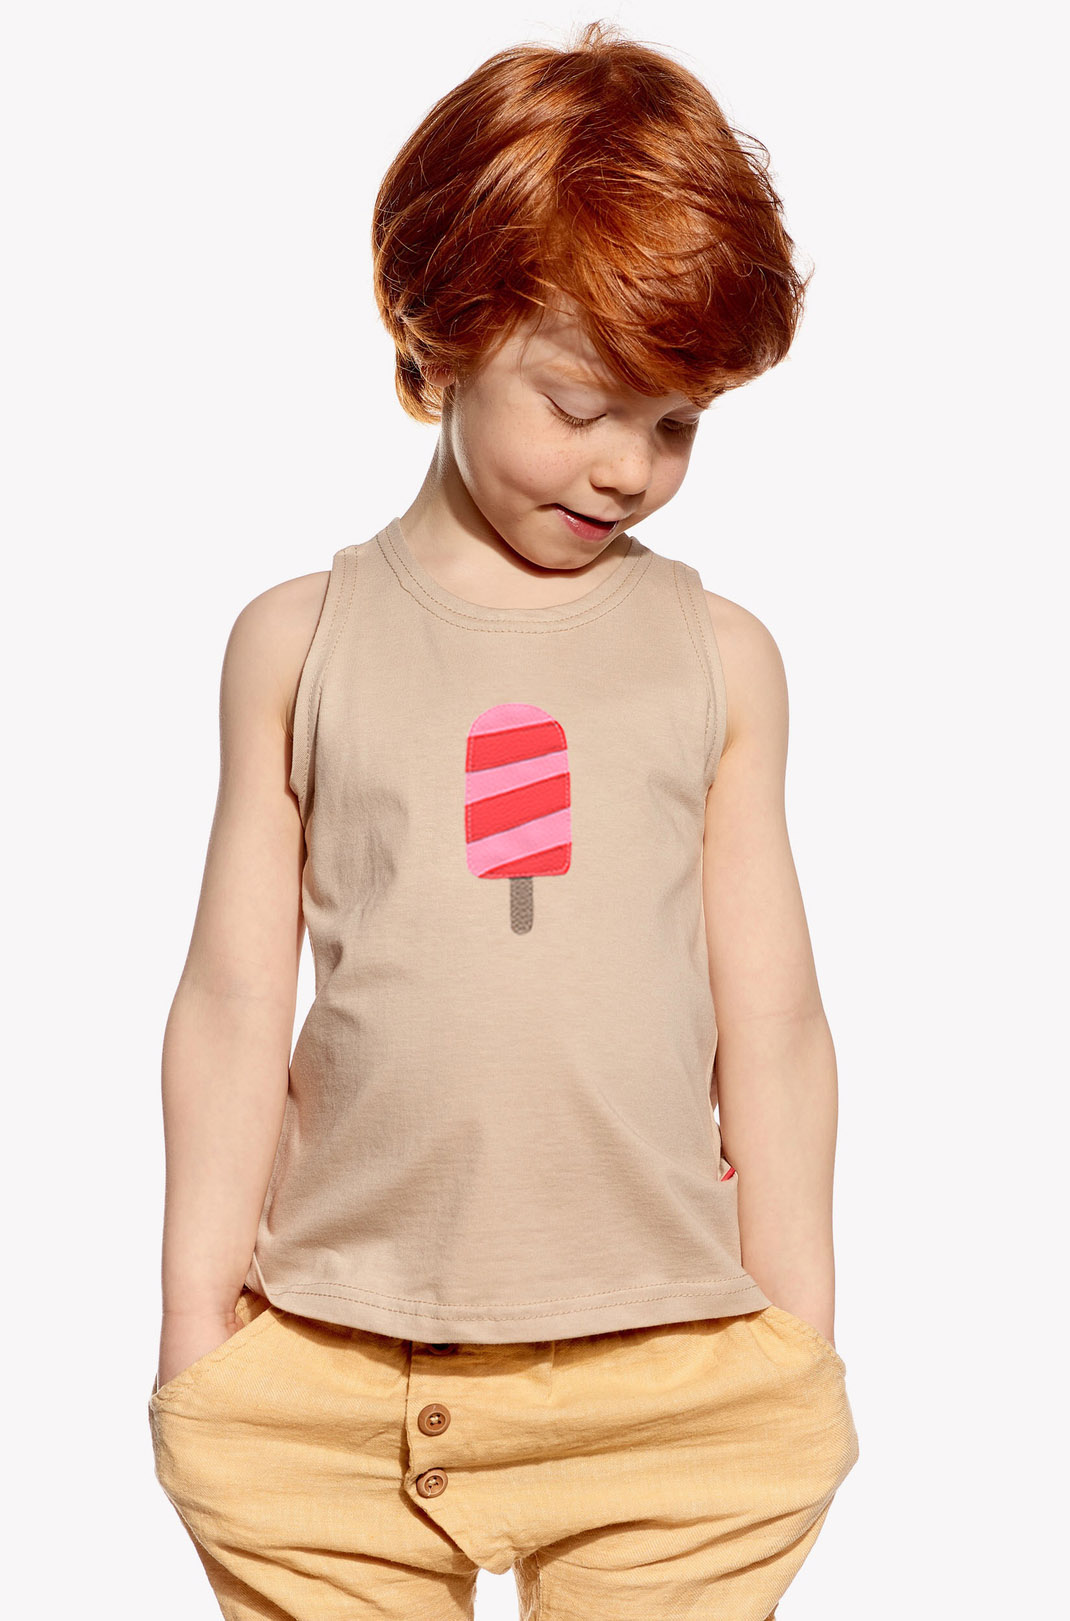 Singlet with ice lolly